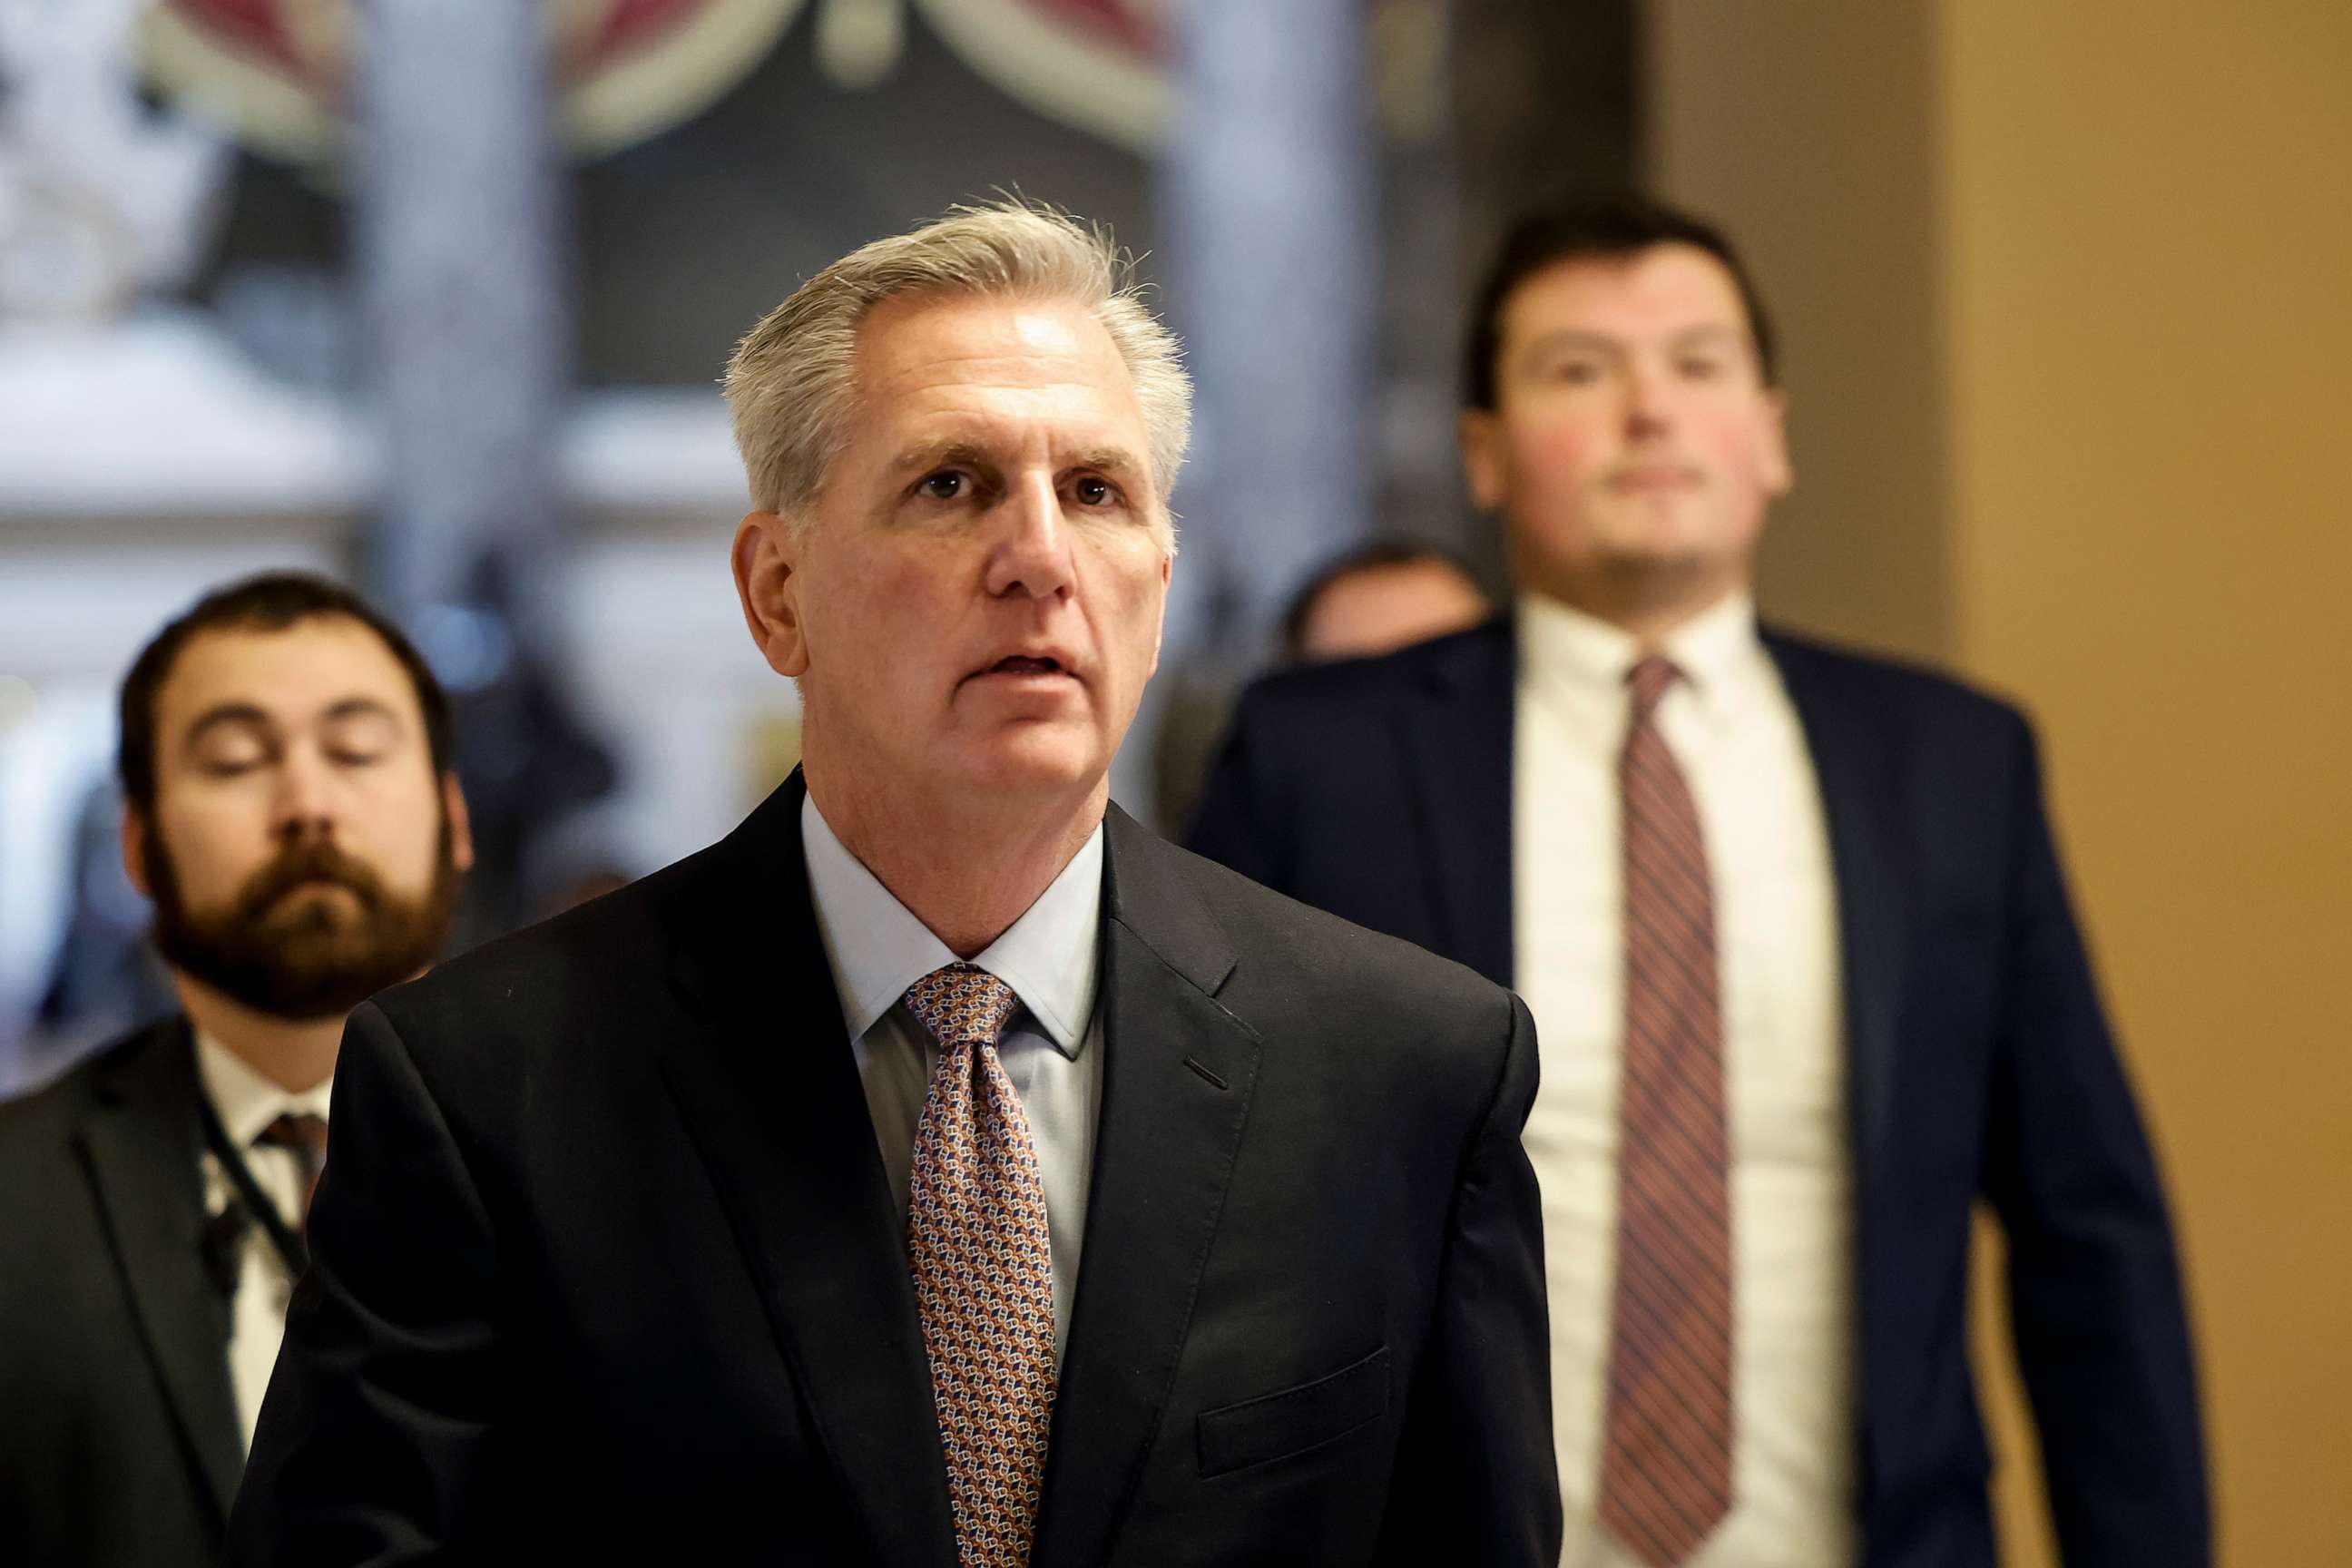 PHOTO: WASHINGTON, DC - JANUARY 30: Speaker of the House Kevin McCarthy walks to open floor of the House Chambers in the U.S. Capitol Building on Jan. 30, 2023. The White House said McCarthy would be attending a meeting with Joe Biden later this week.